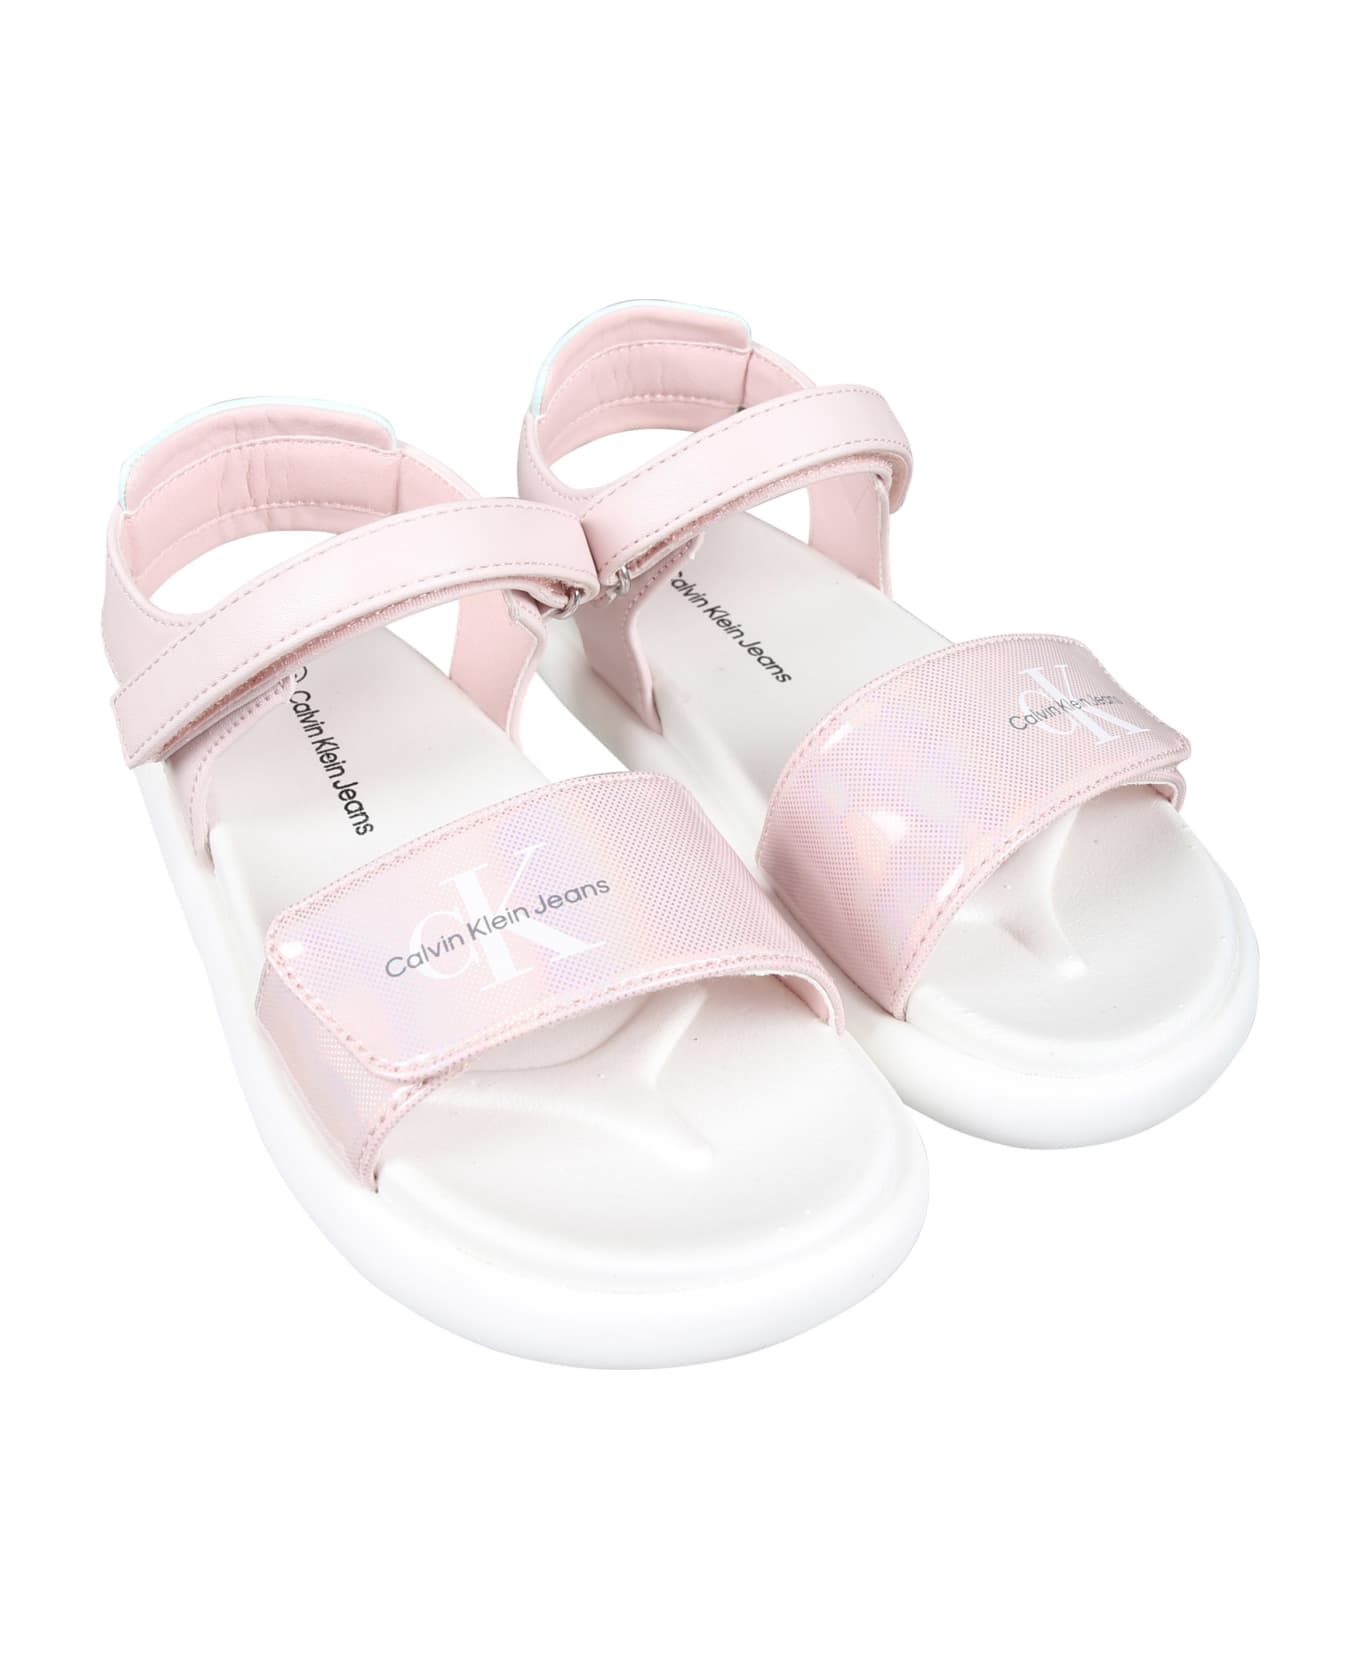 Calvin Klein Pink Sandals For Girl With Logo - Pink